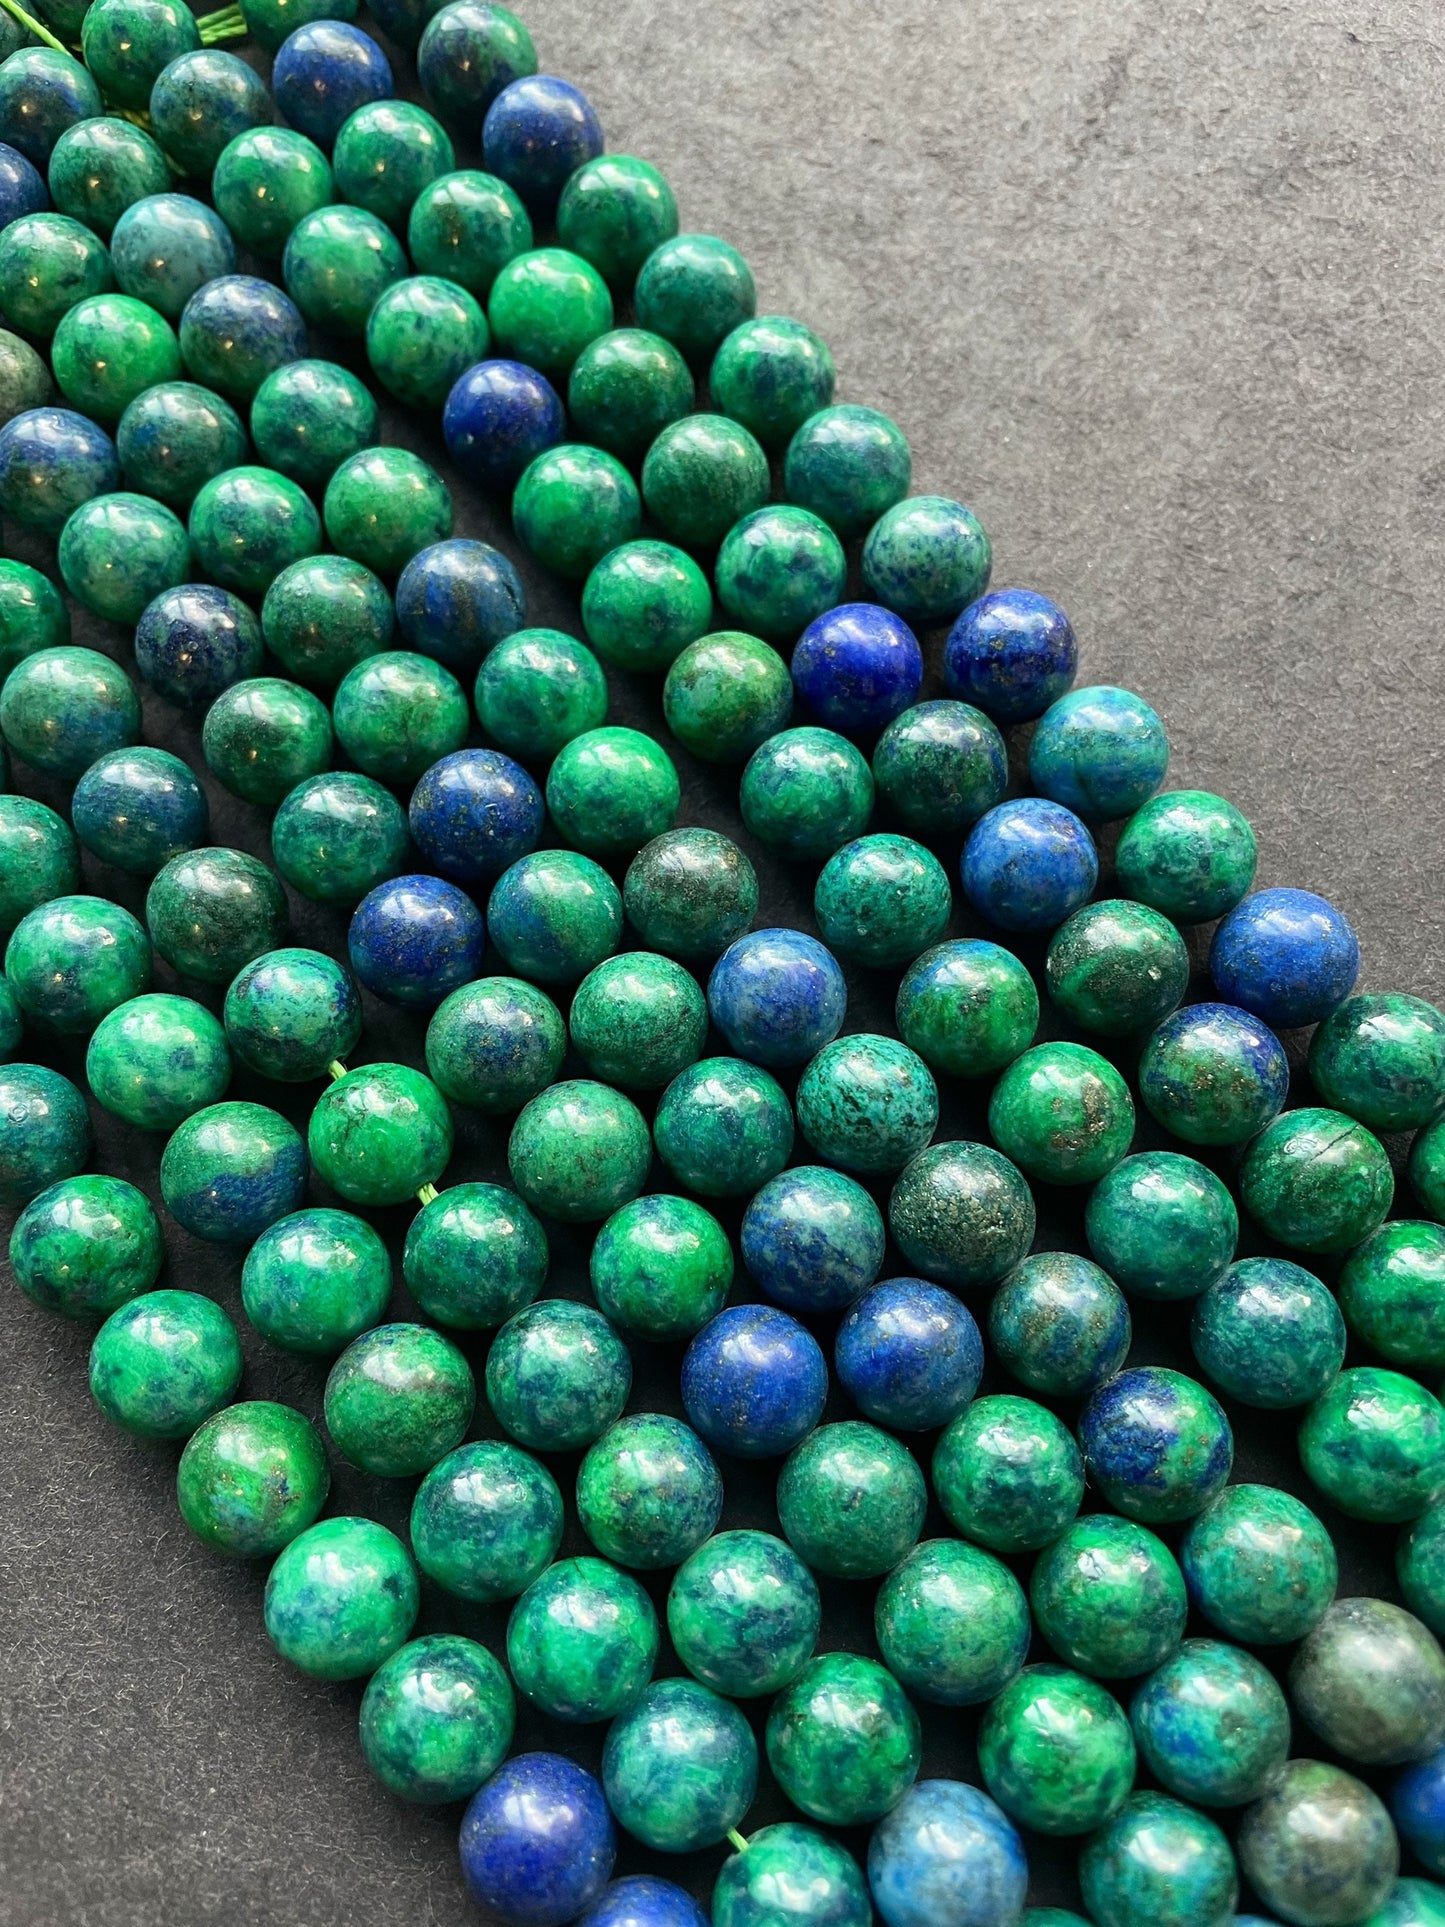 Natural Azurite Gemstone Bead 4mm 6mm 8mm 10mm Round Beads, Gorgeous Green Blue Color Azurite Gemstone Beads